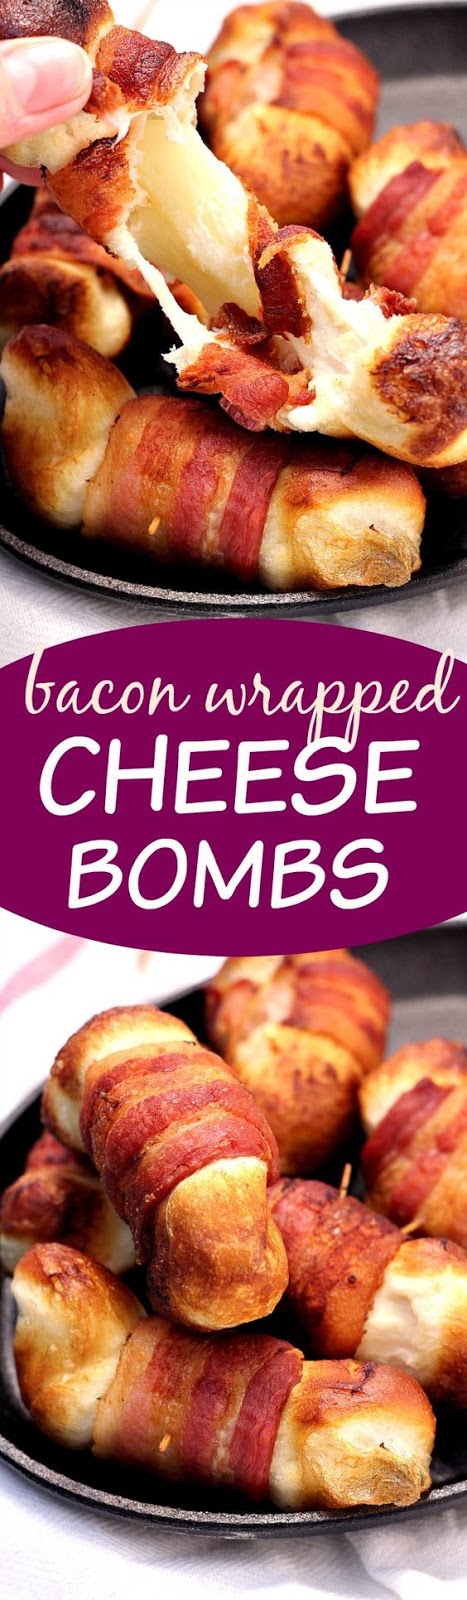 Bacon Wrapped Cheese Bombs Recipe